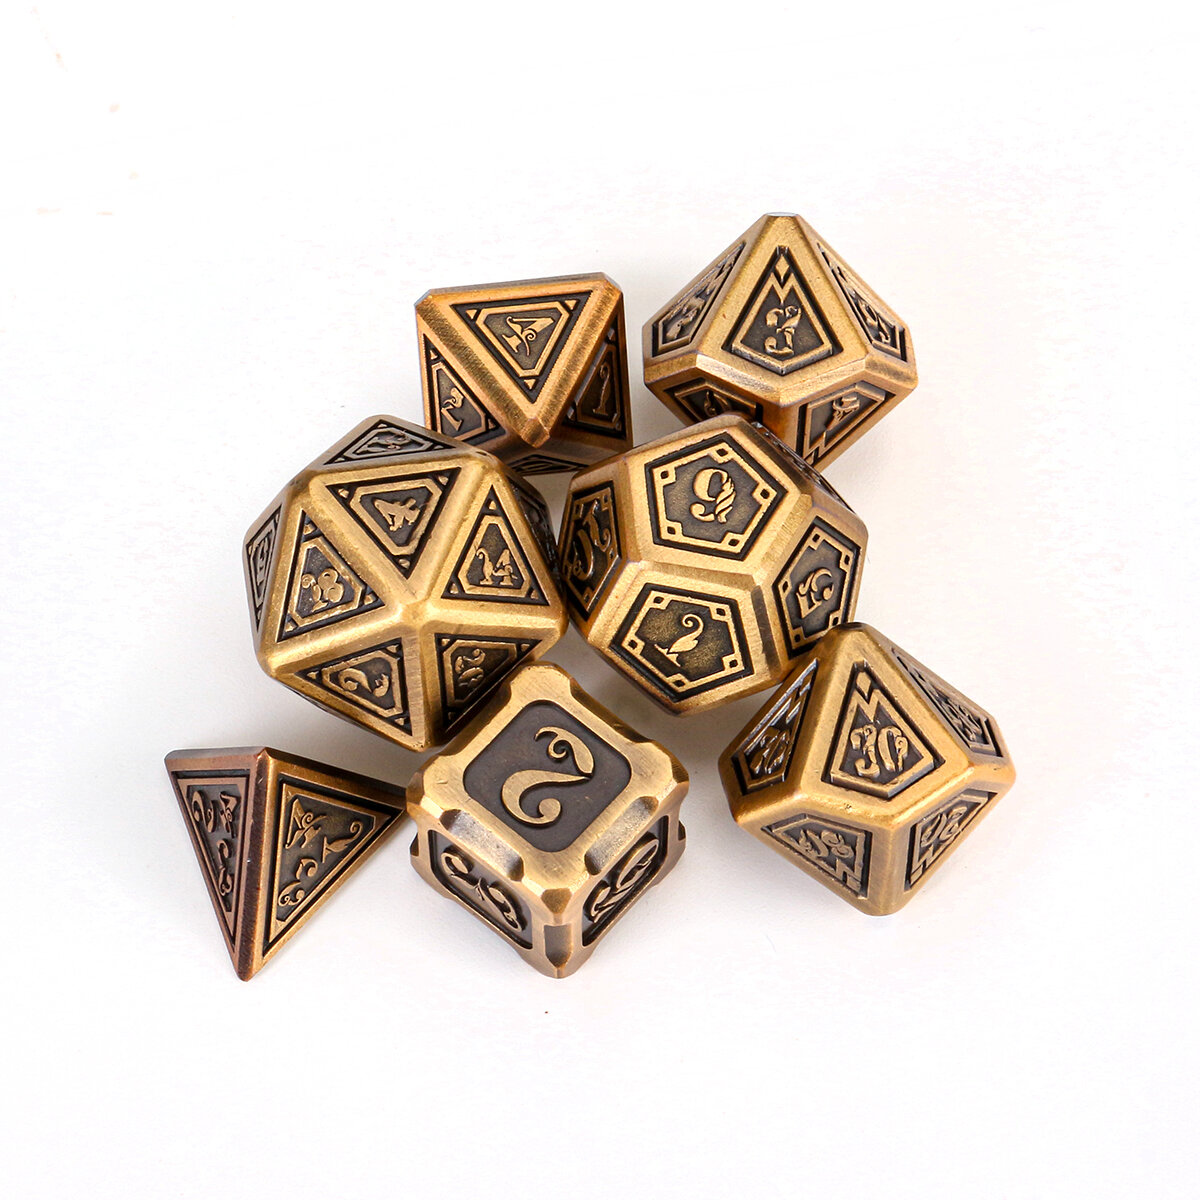 7pcs Embossed Metal Polyhedral Dice for DnD RPG MTG Board Games Dices 